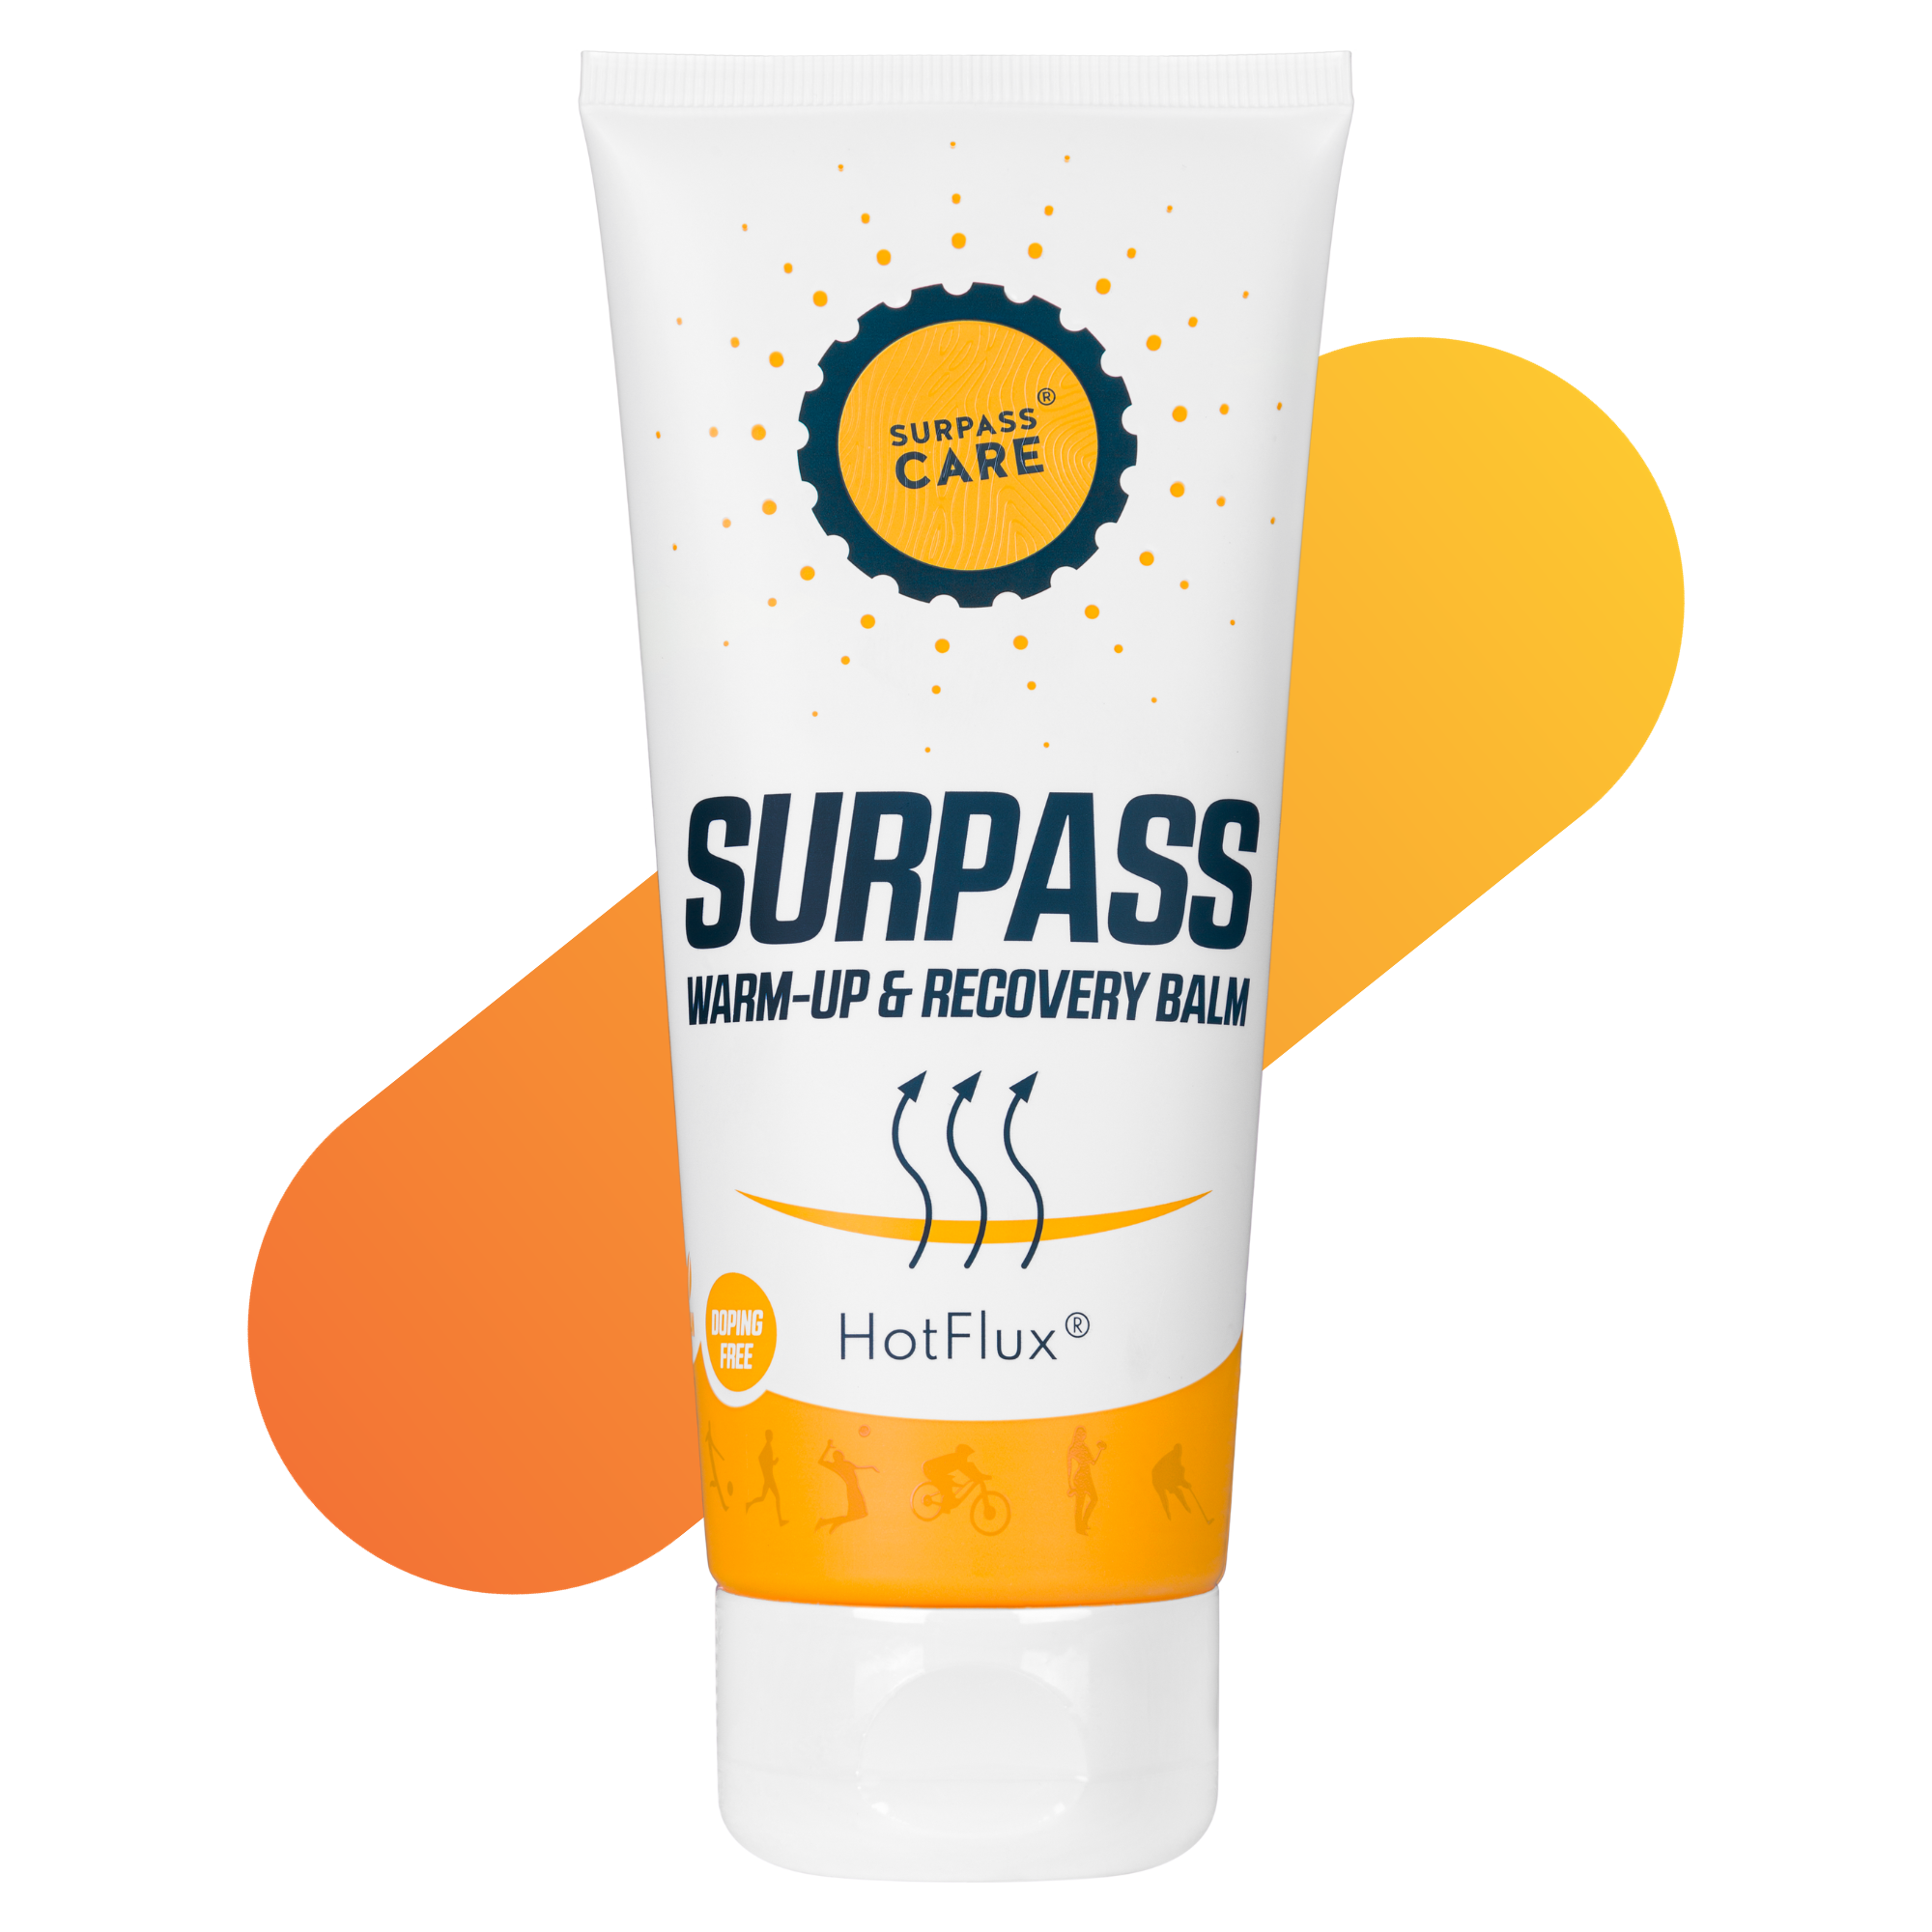 SURPASS Warm-Up & Recovery Balm